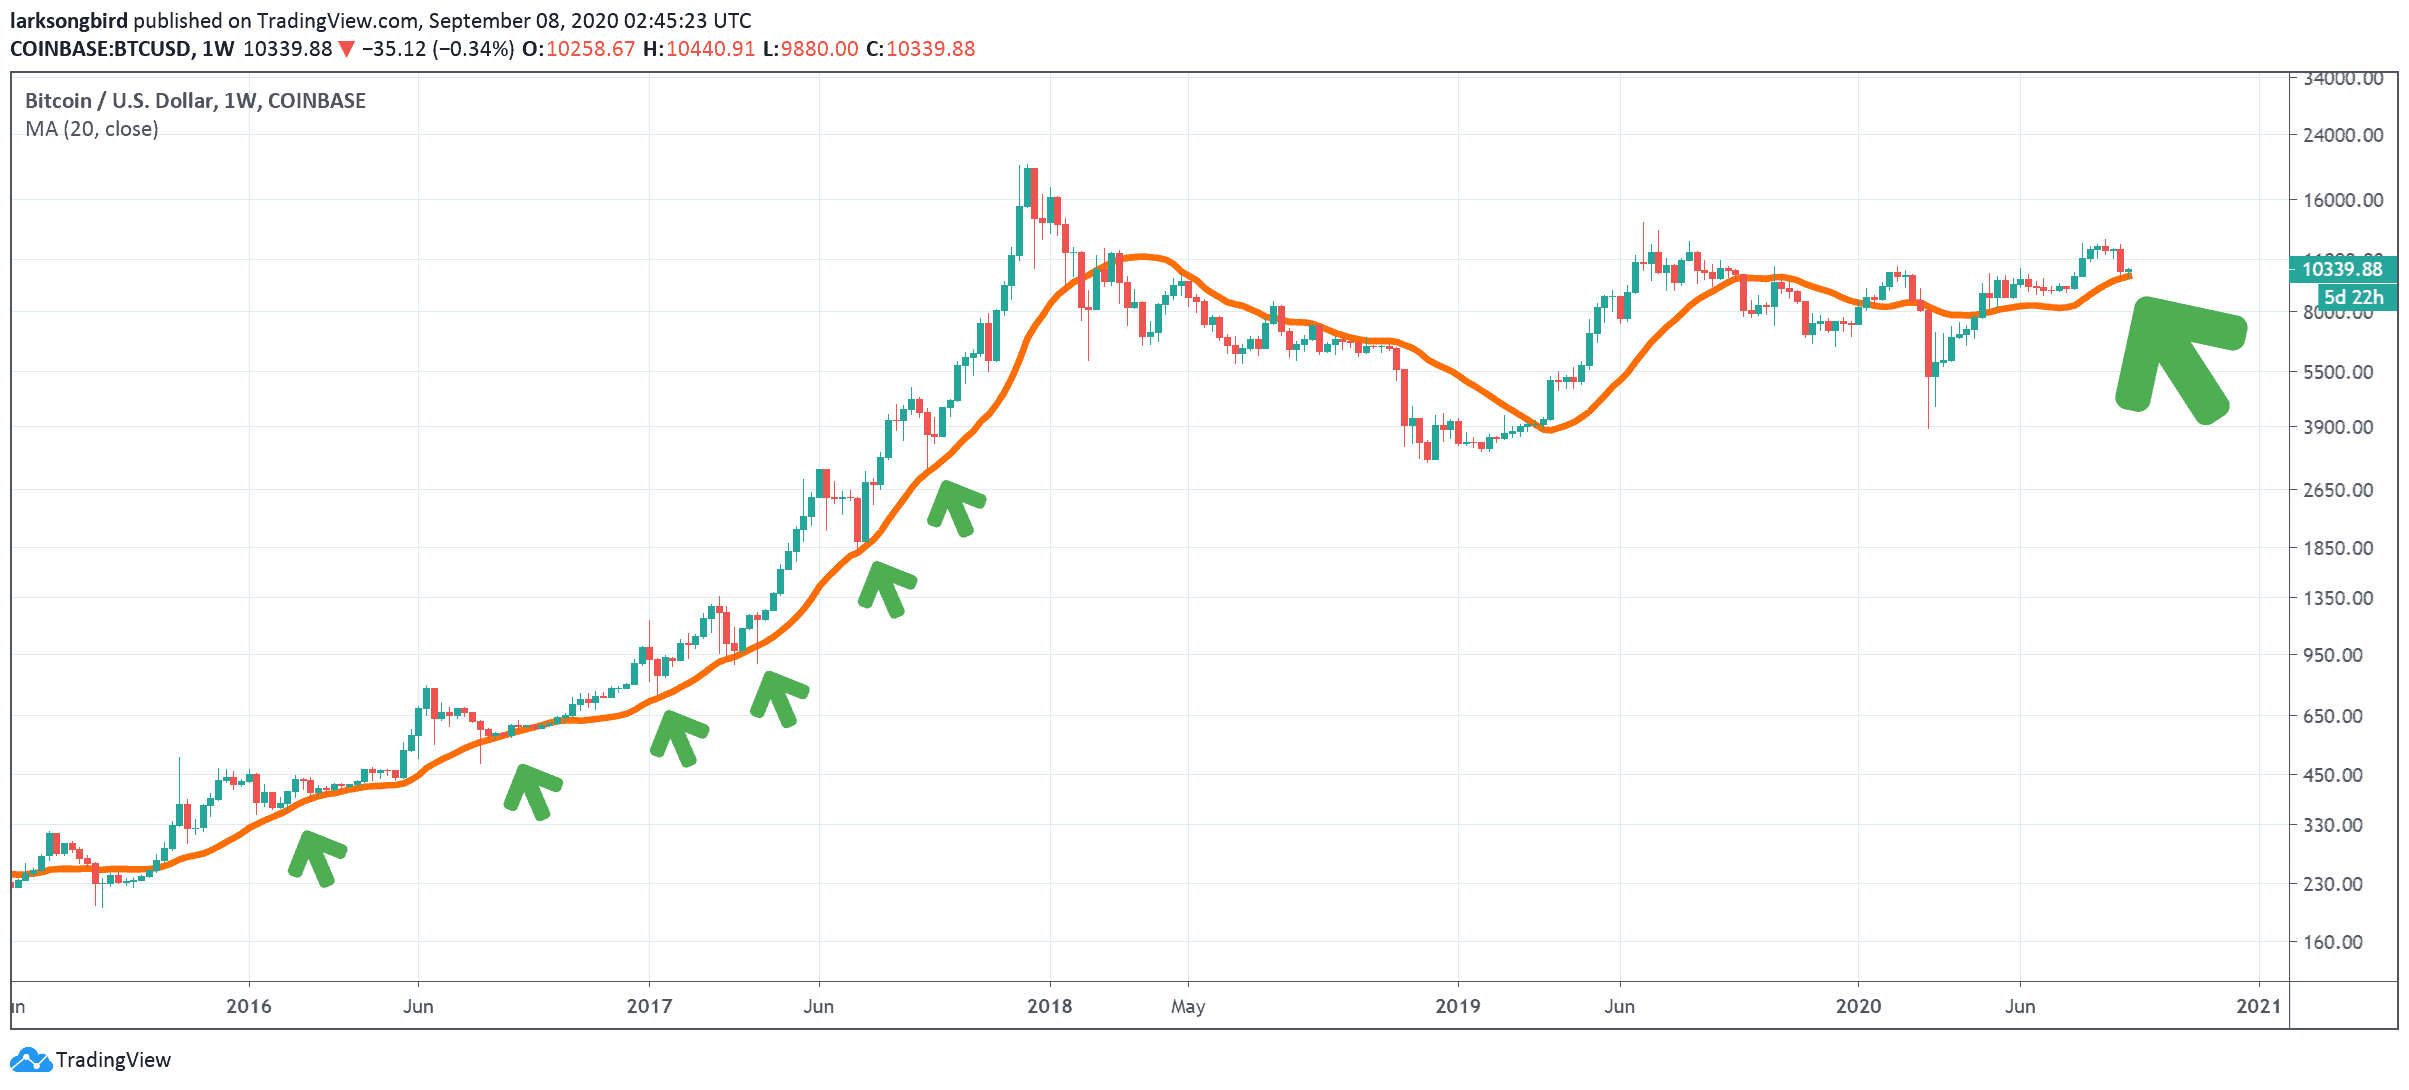 Bullish Sign? Current Bitcoin Price Correction Is Typical Compared To 2017 Bull-Run